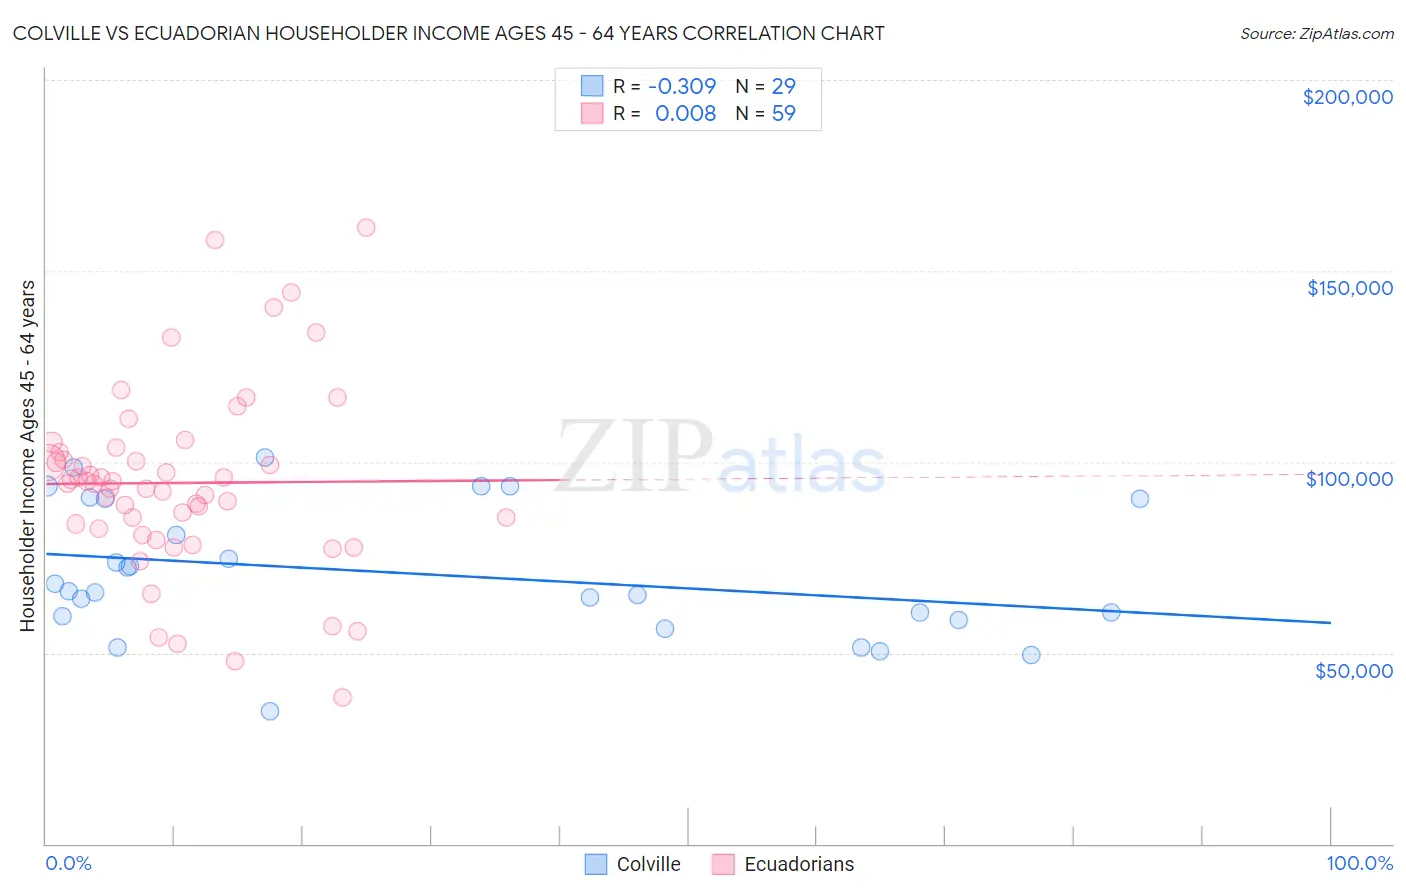 Colville vs Ecuadorian Householder Income Ages 45 - 64 years